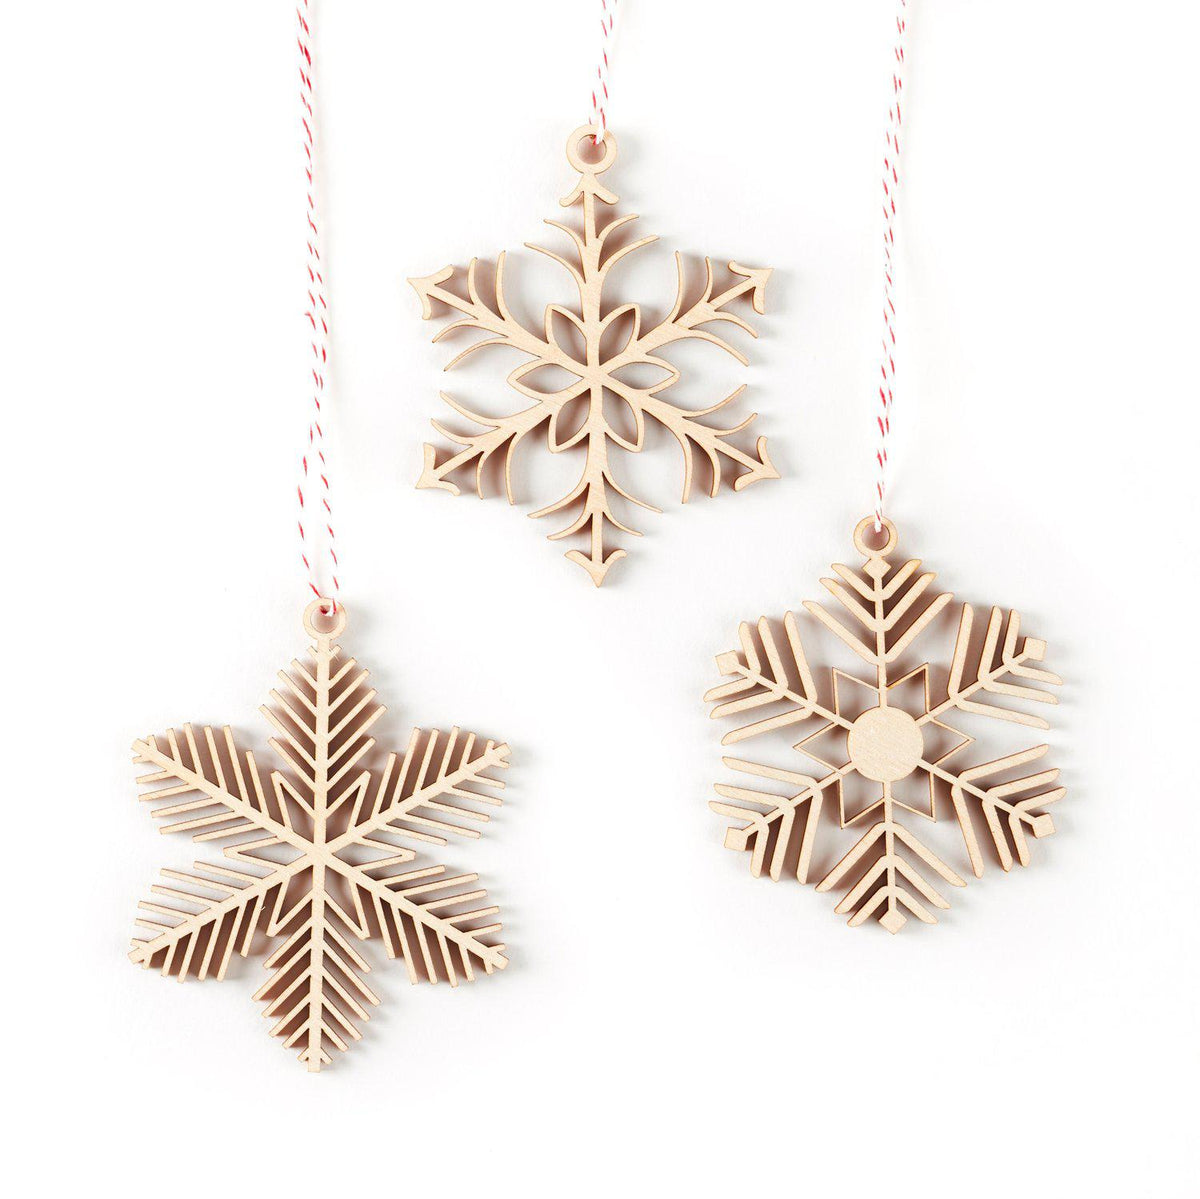 Delicate Snowflake Ornaments - 3 Pack-Light + Paper-Crying Out Loud